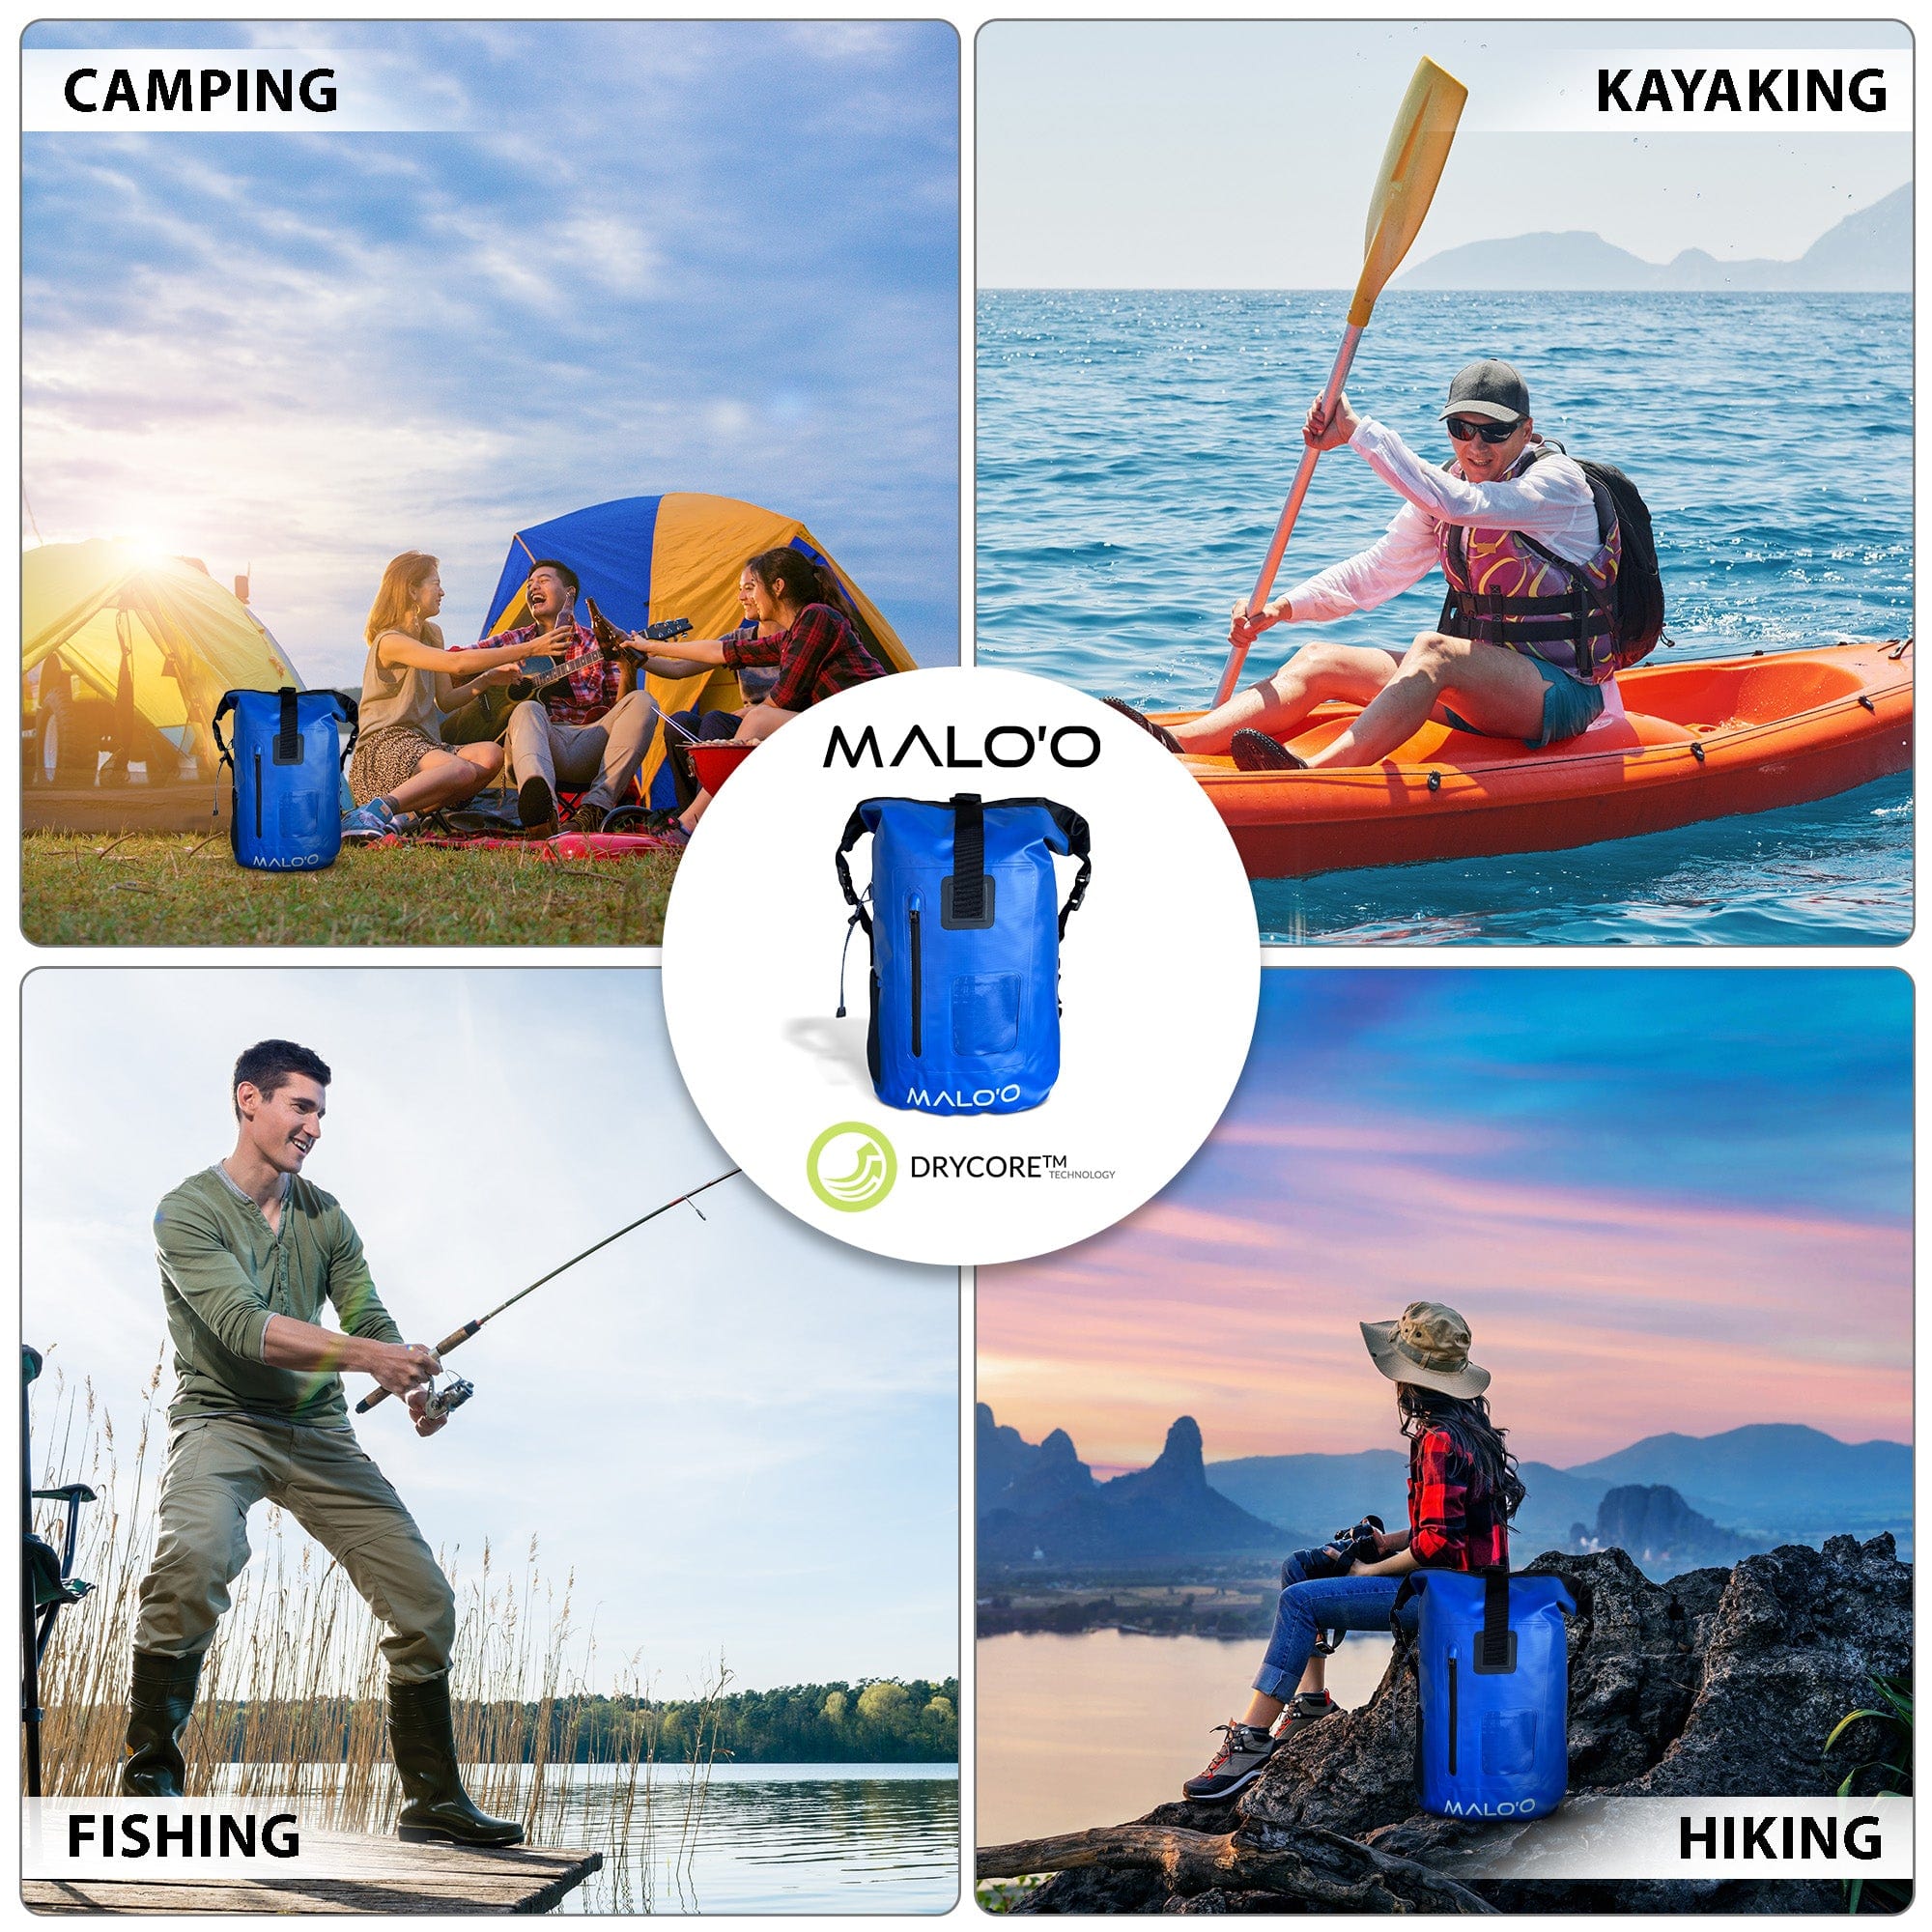 Malo'o 45L Waterproof Heavy Duty Backpack Dry Bags for Kayaking, Camping,  Fishing, Hiking Daypack - Beach Accessories, Boat accessories, and Travel